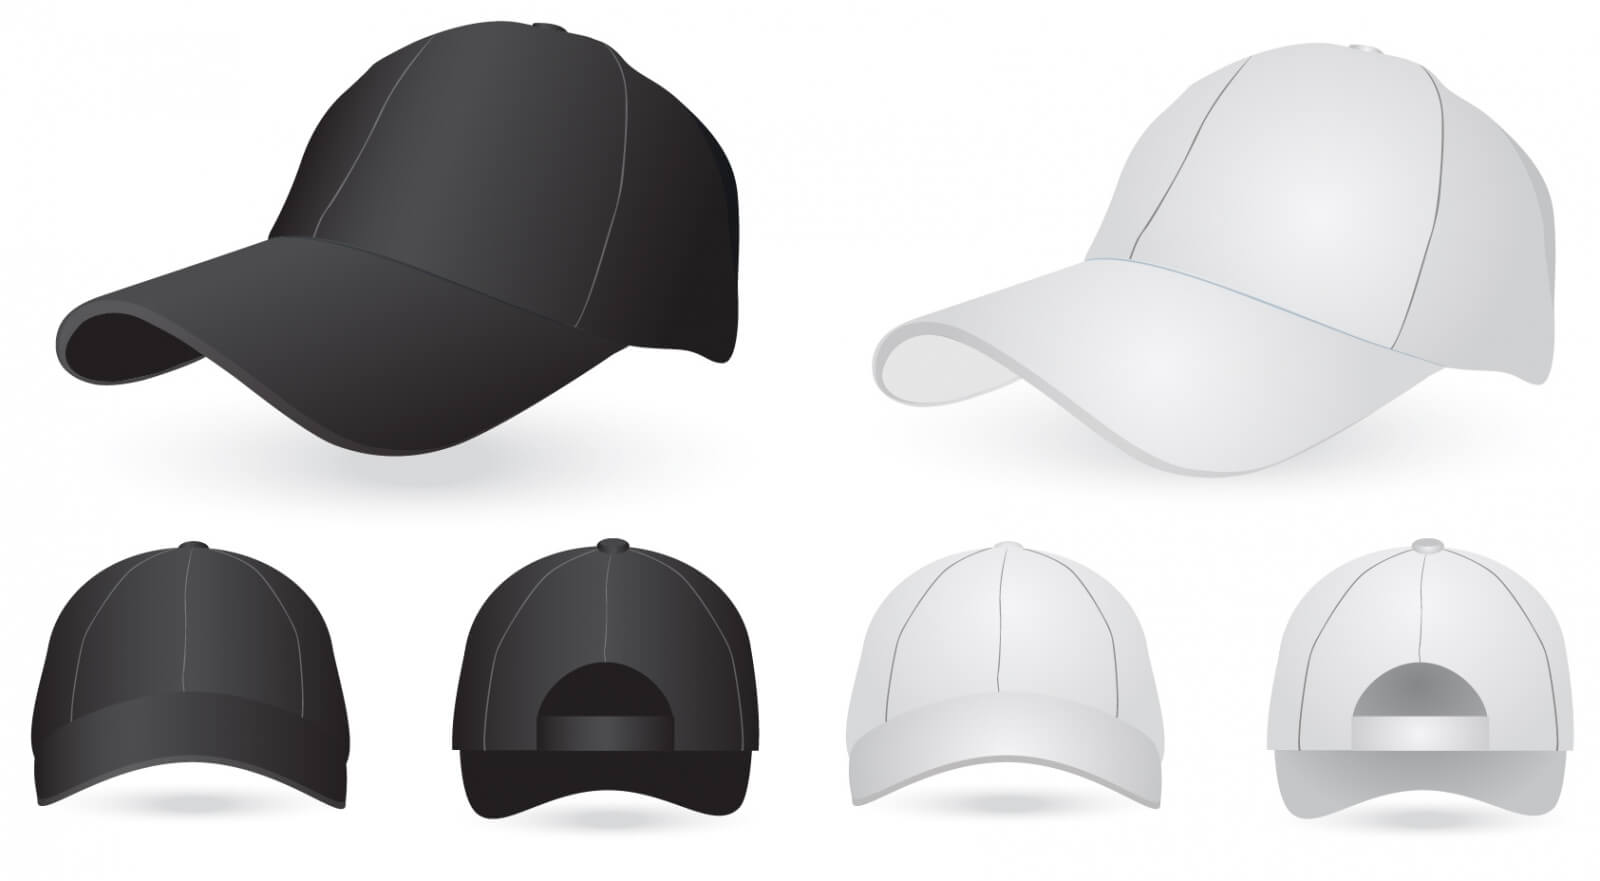 18 Hat Template Vector Images – Bucket Hat Template Pertaining To 5 Panel Hat Template